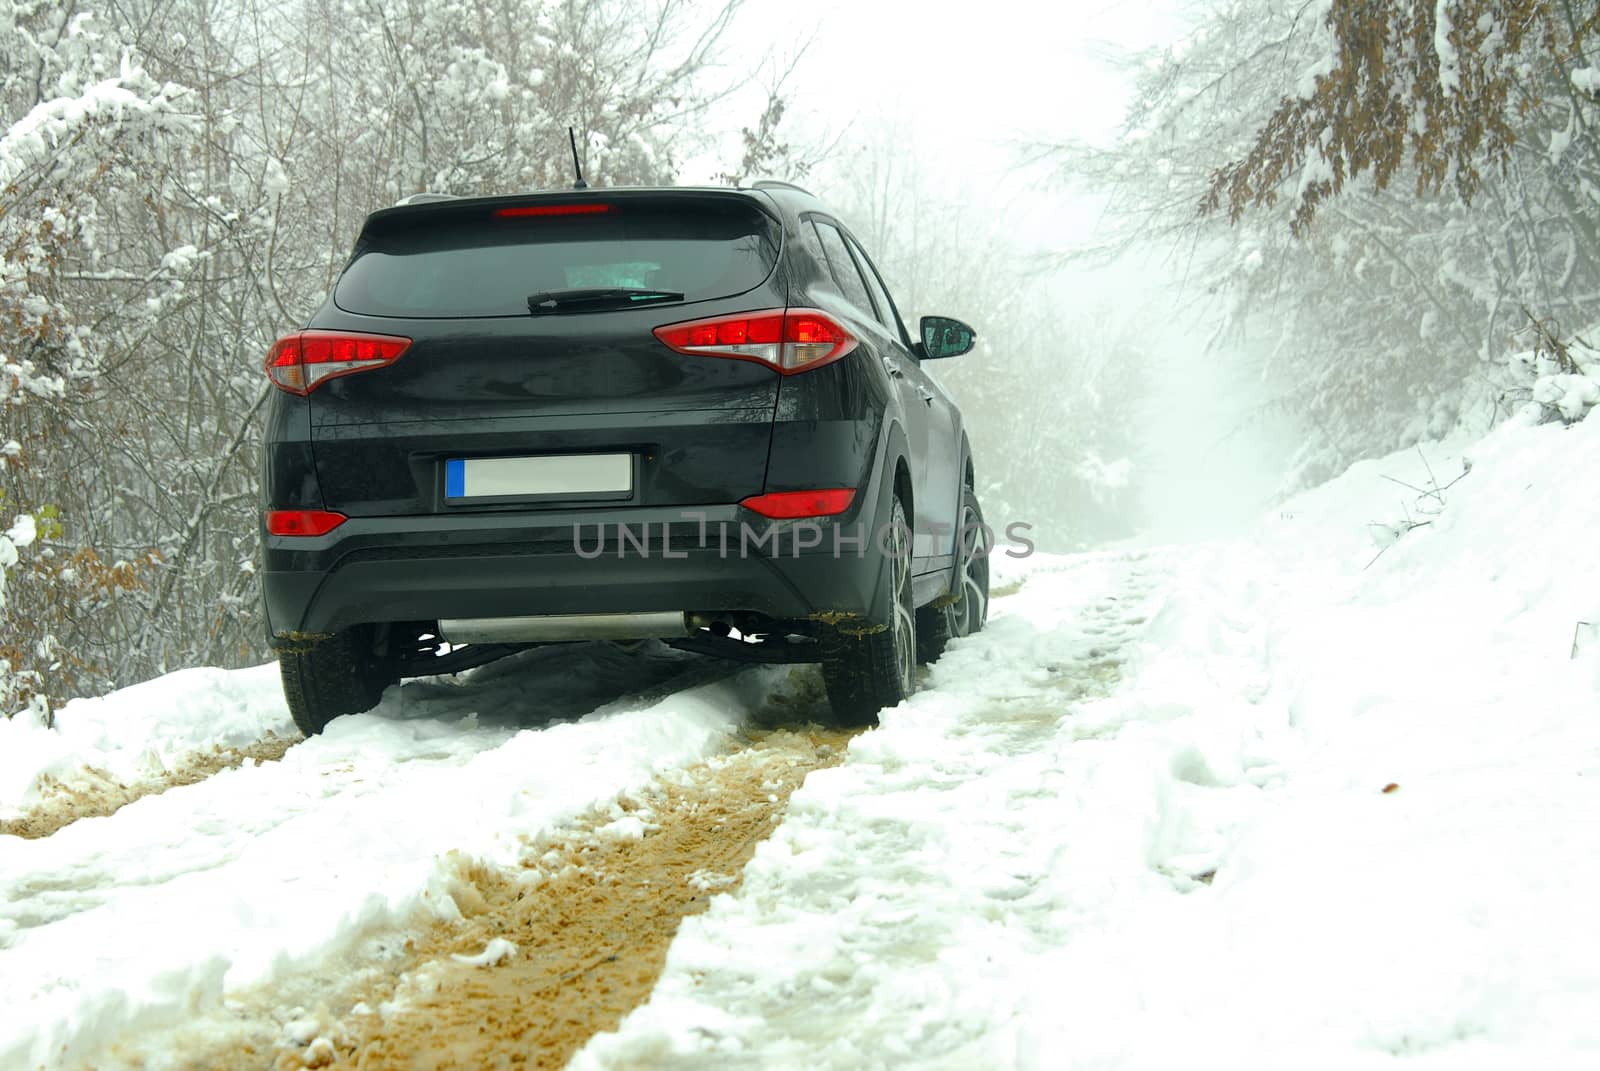 Off-road SUV in mud and snow by aselsa